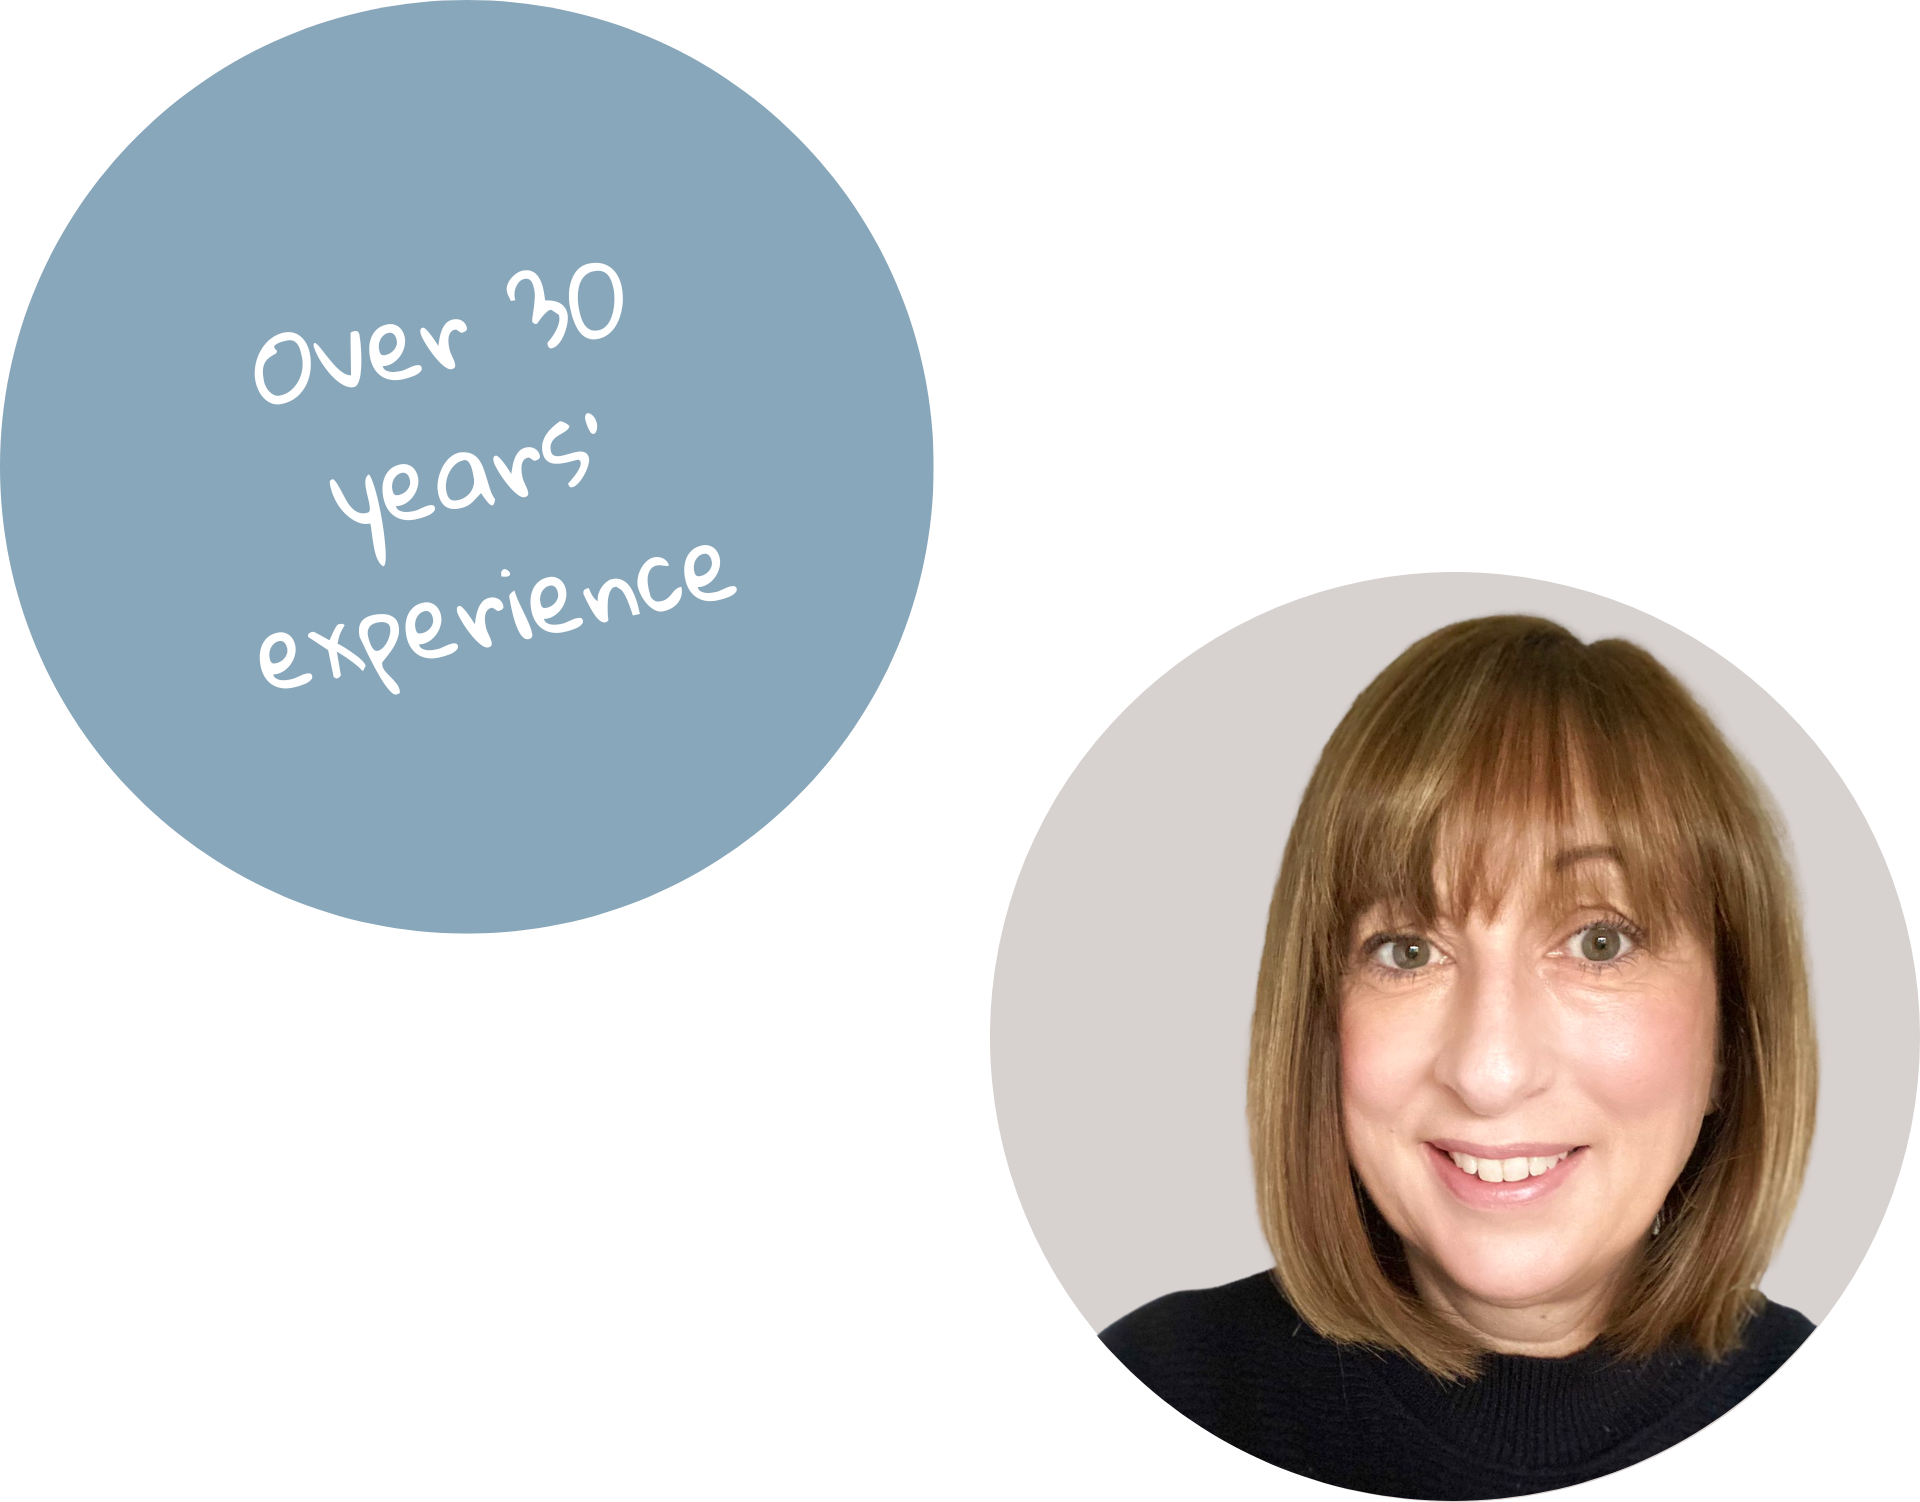 Two circular images show the text "Over 30 years' experience" and Gill Medhurst's professional portrait.